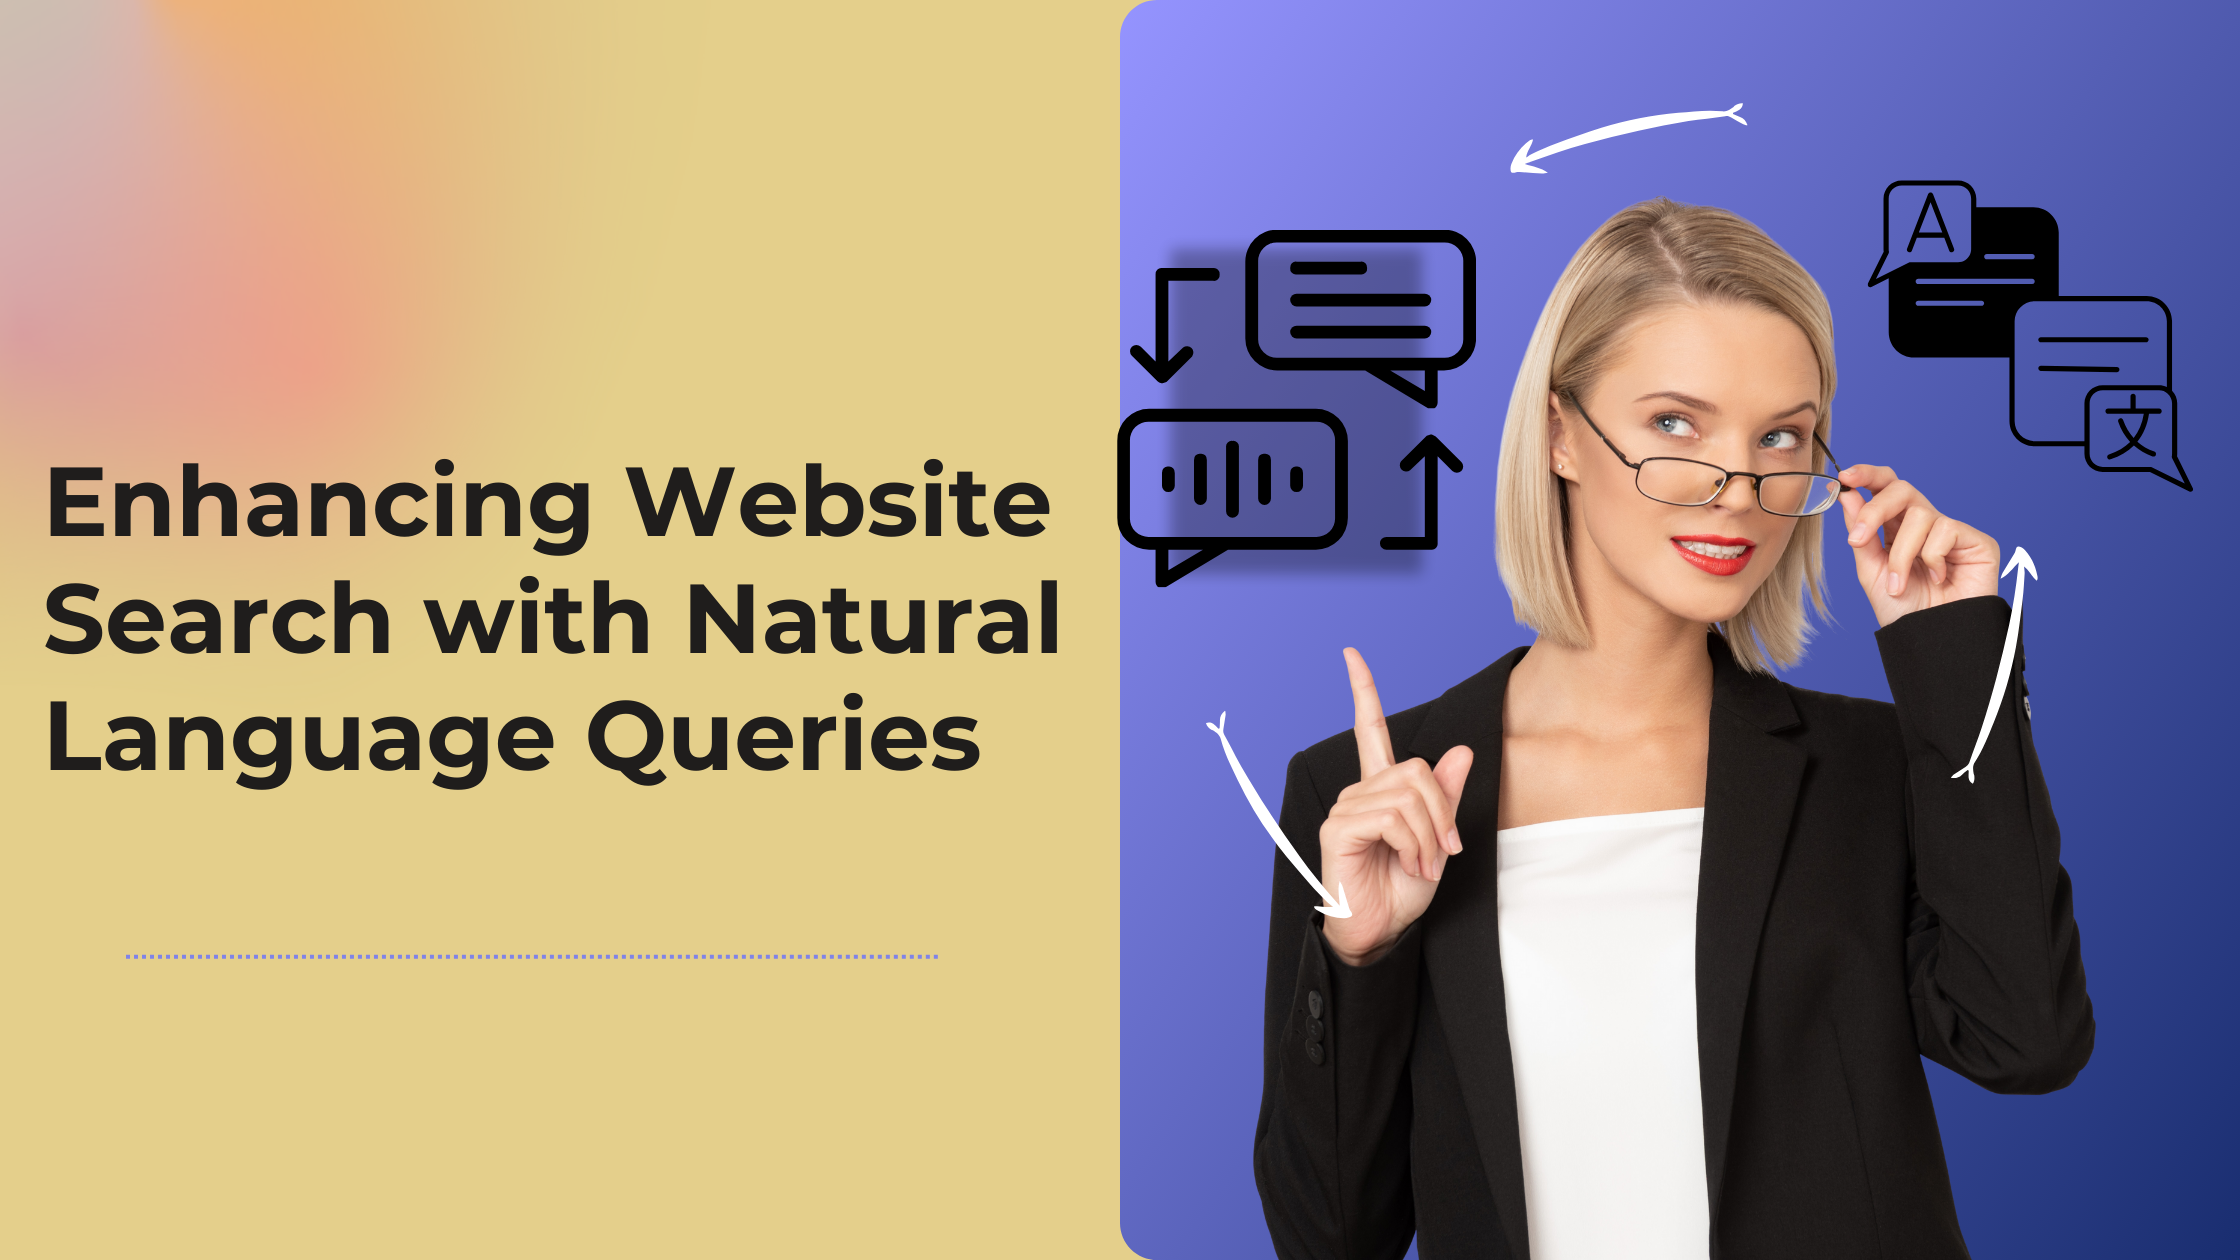  Elevating Website Search Experience with Natural Language Queries  